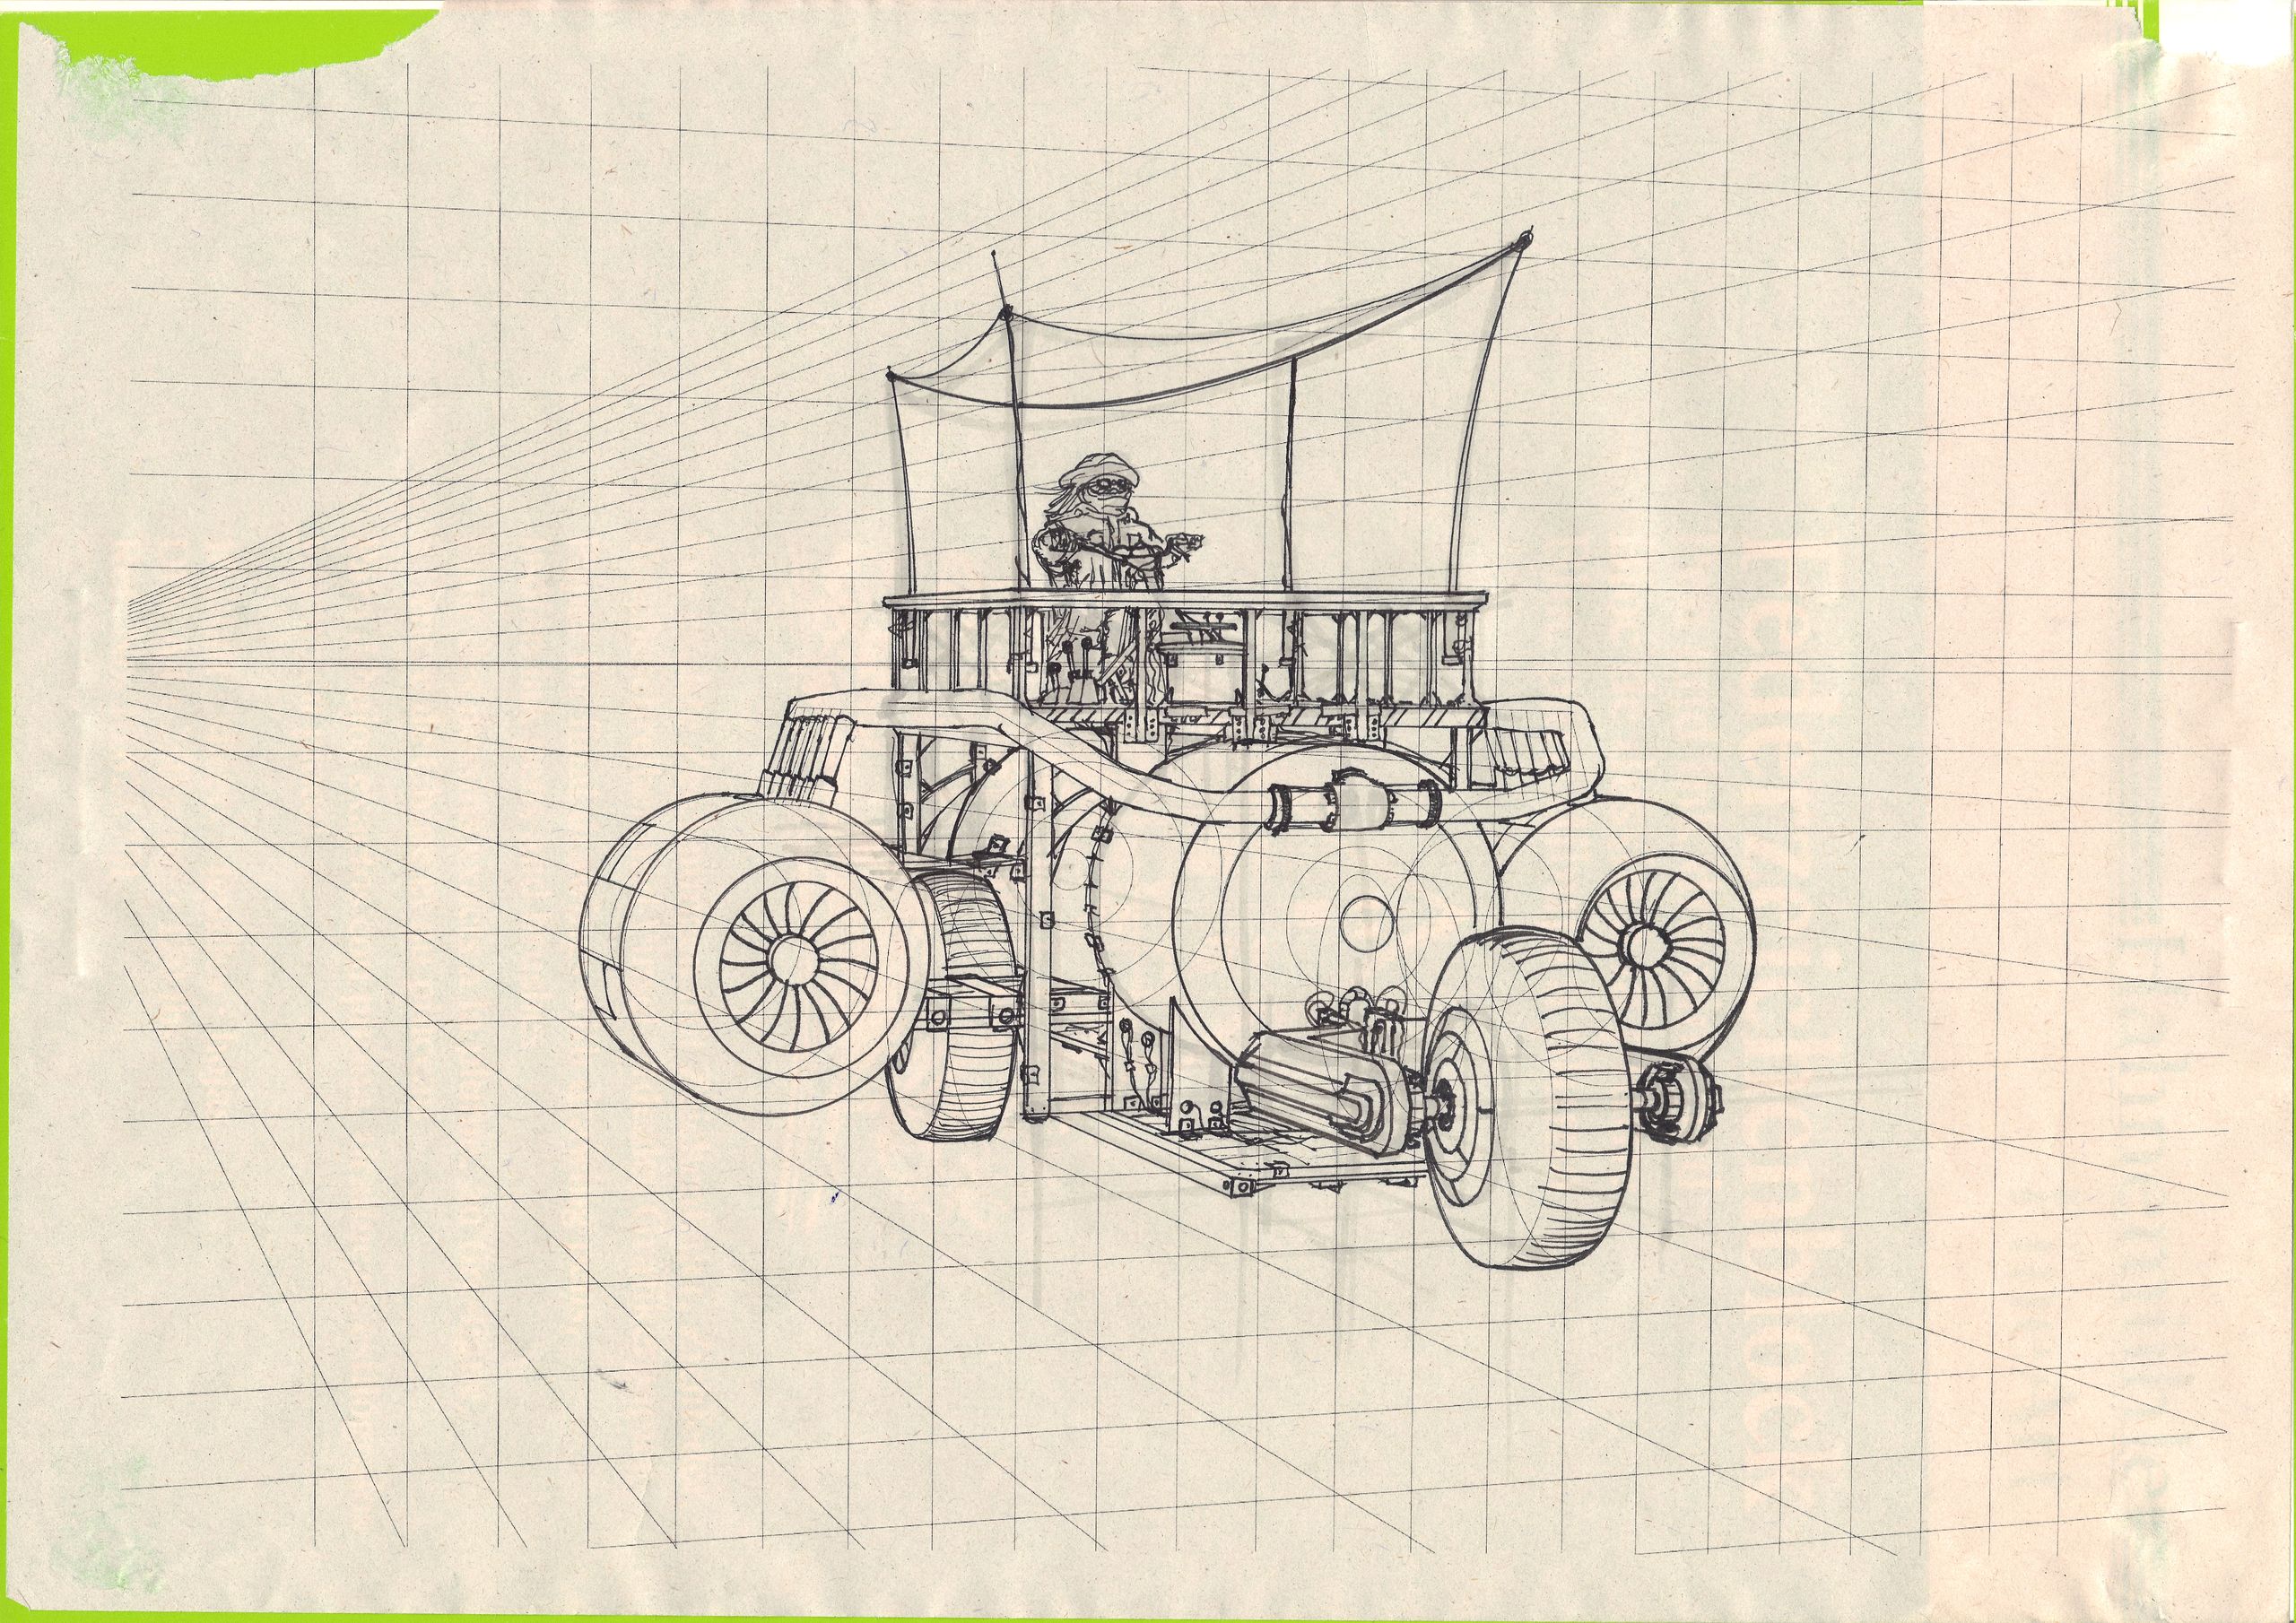 An ink sketch of an oilpunk-style trike with a round gas tank and airplane engines, a hooded rider on top, perspective grid superimposed